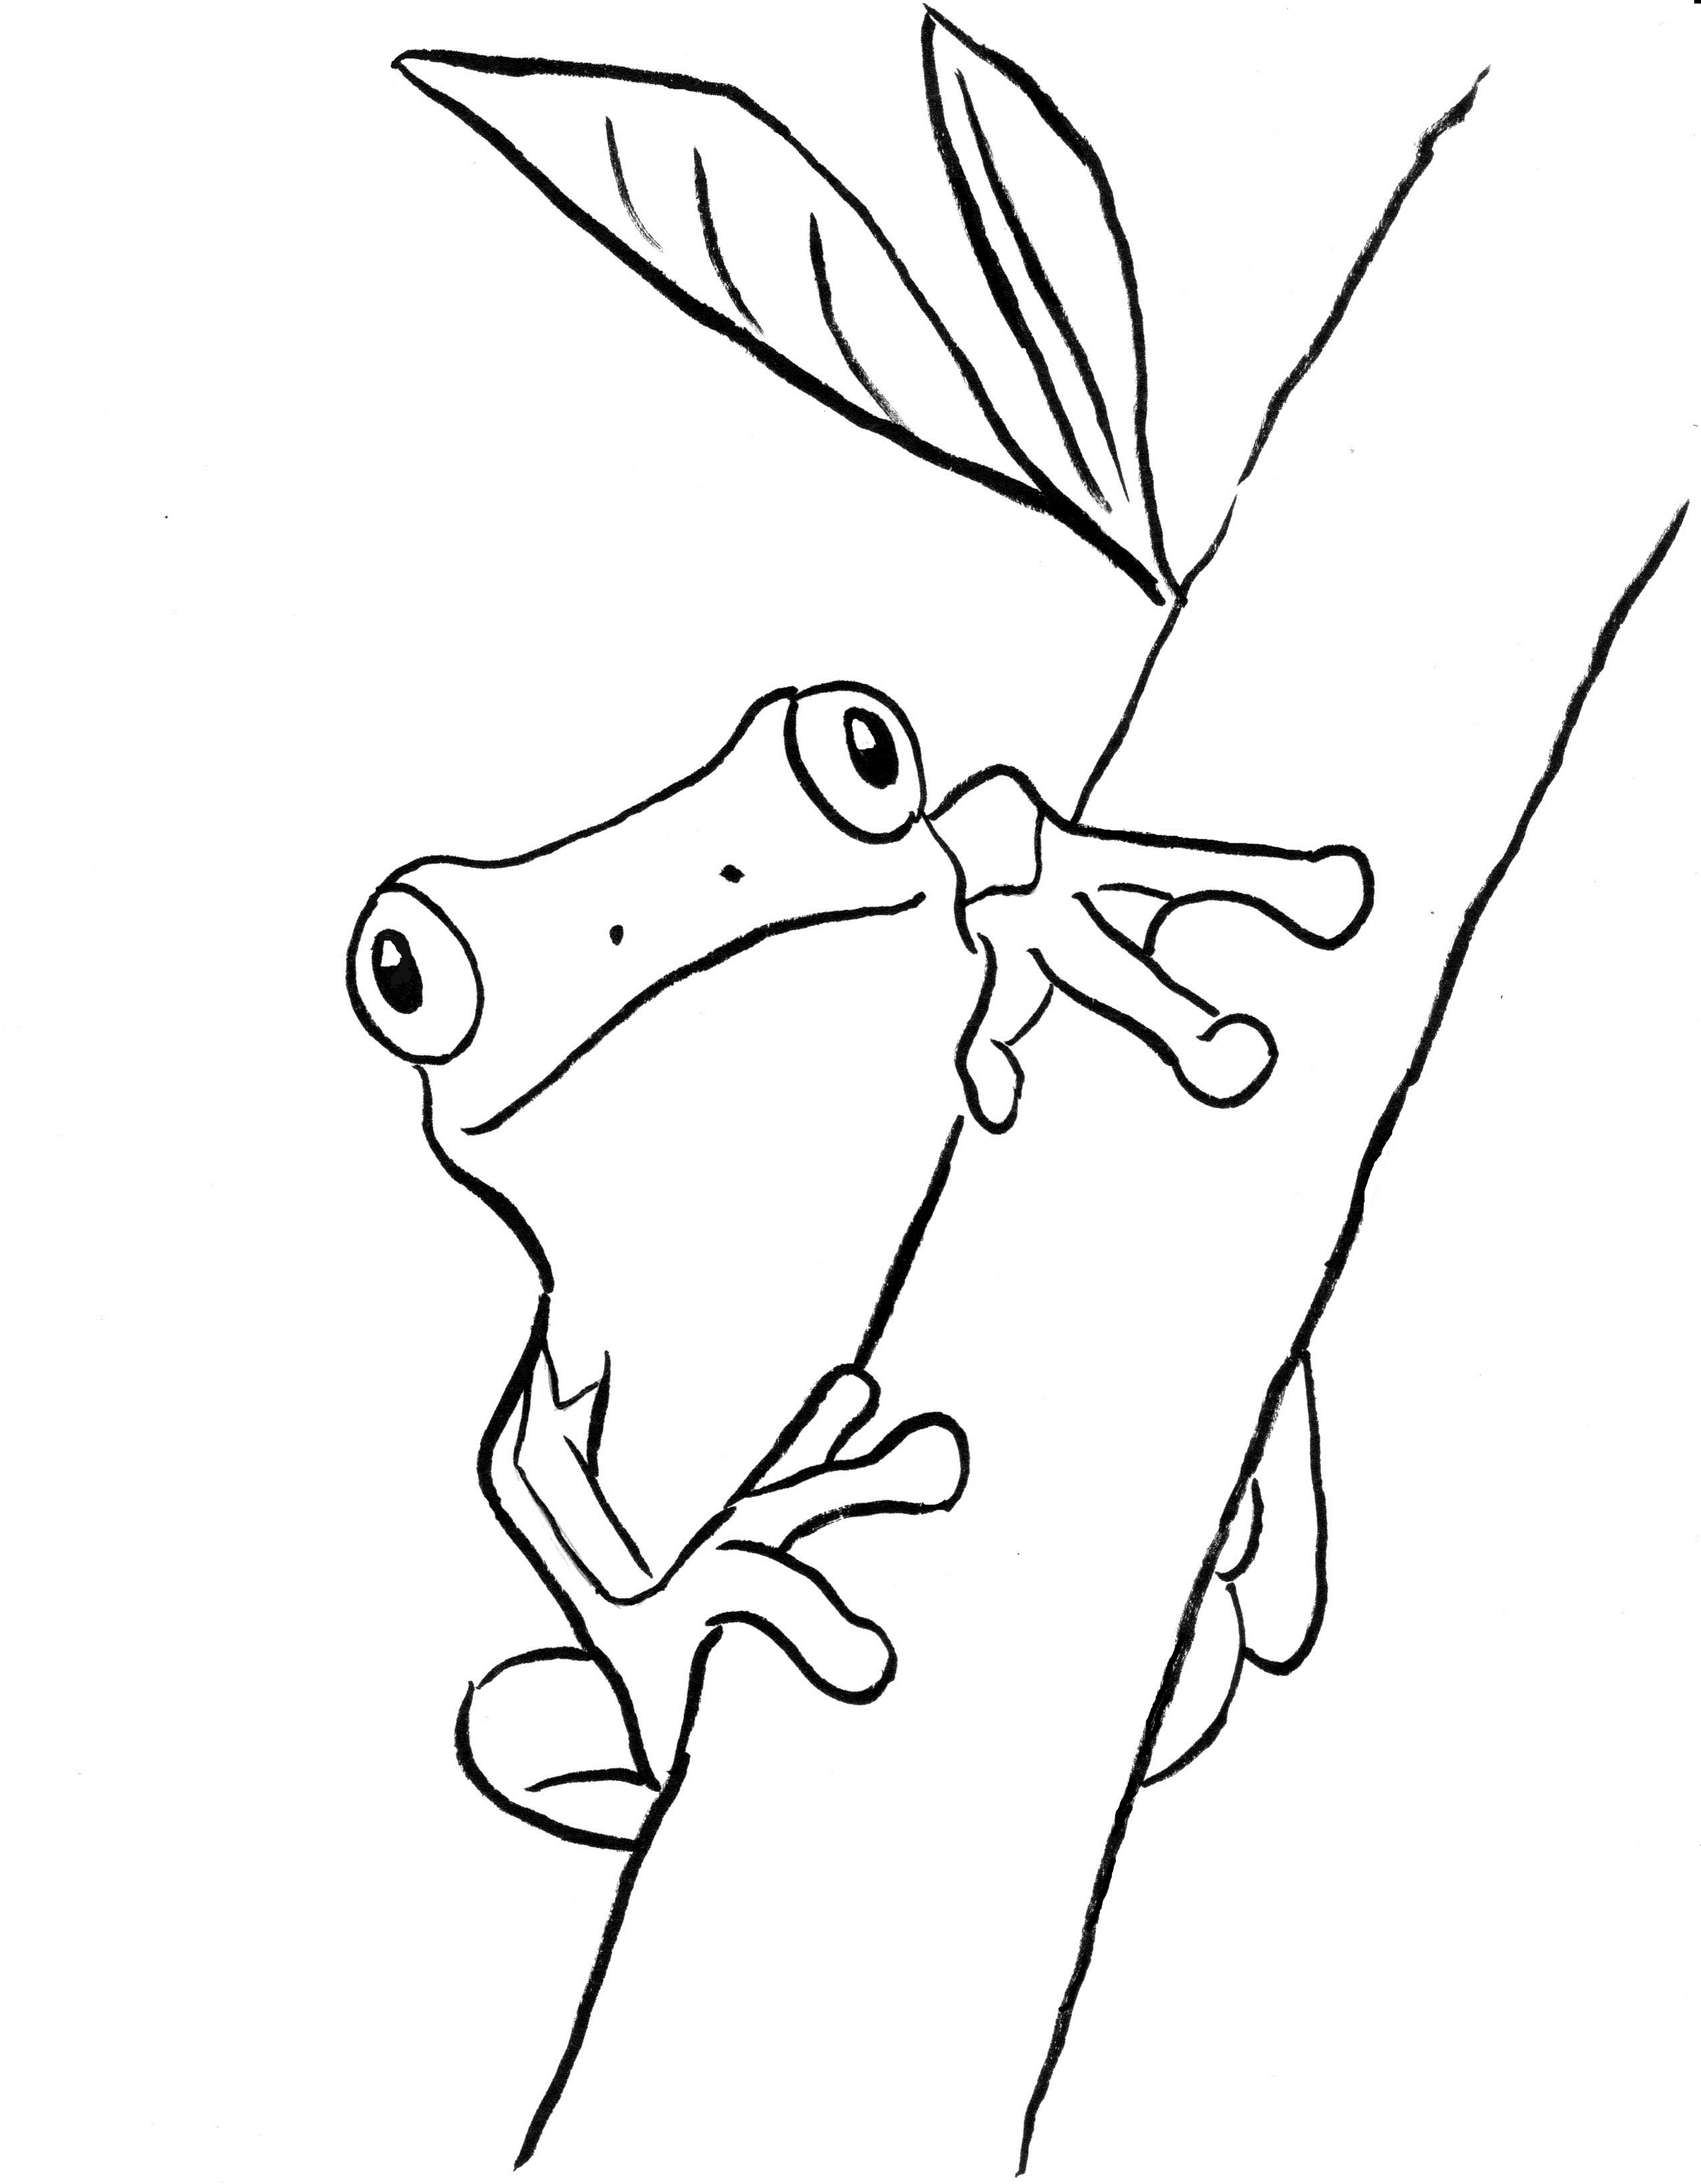 Download Tree Frog Coloring Page - Art Starts